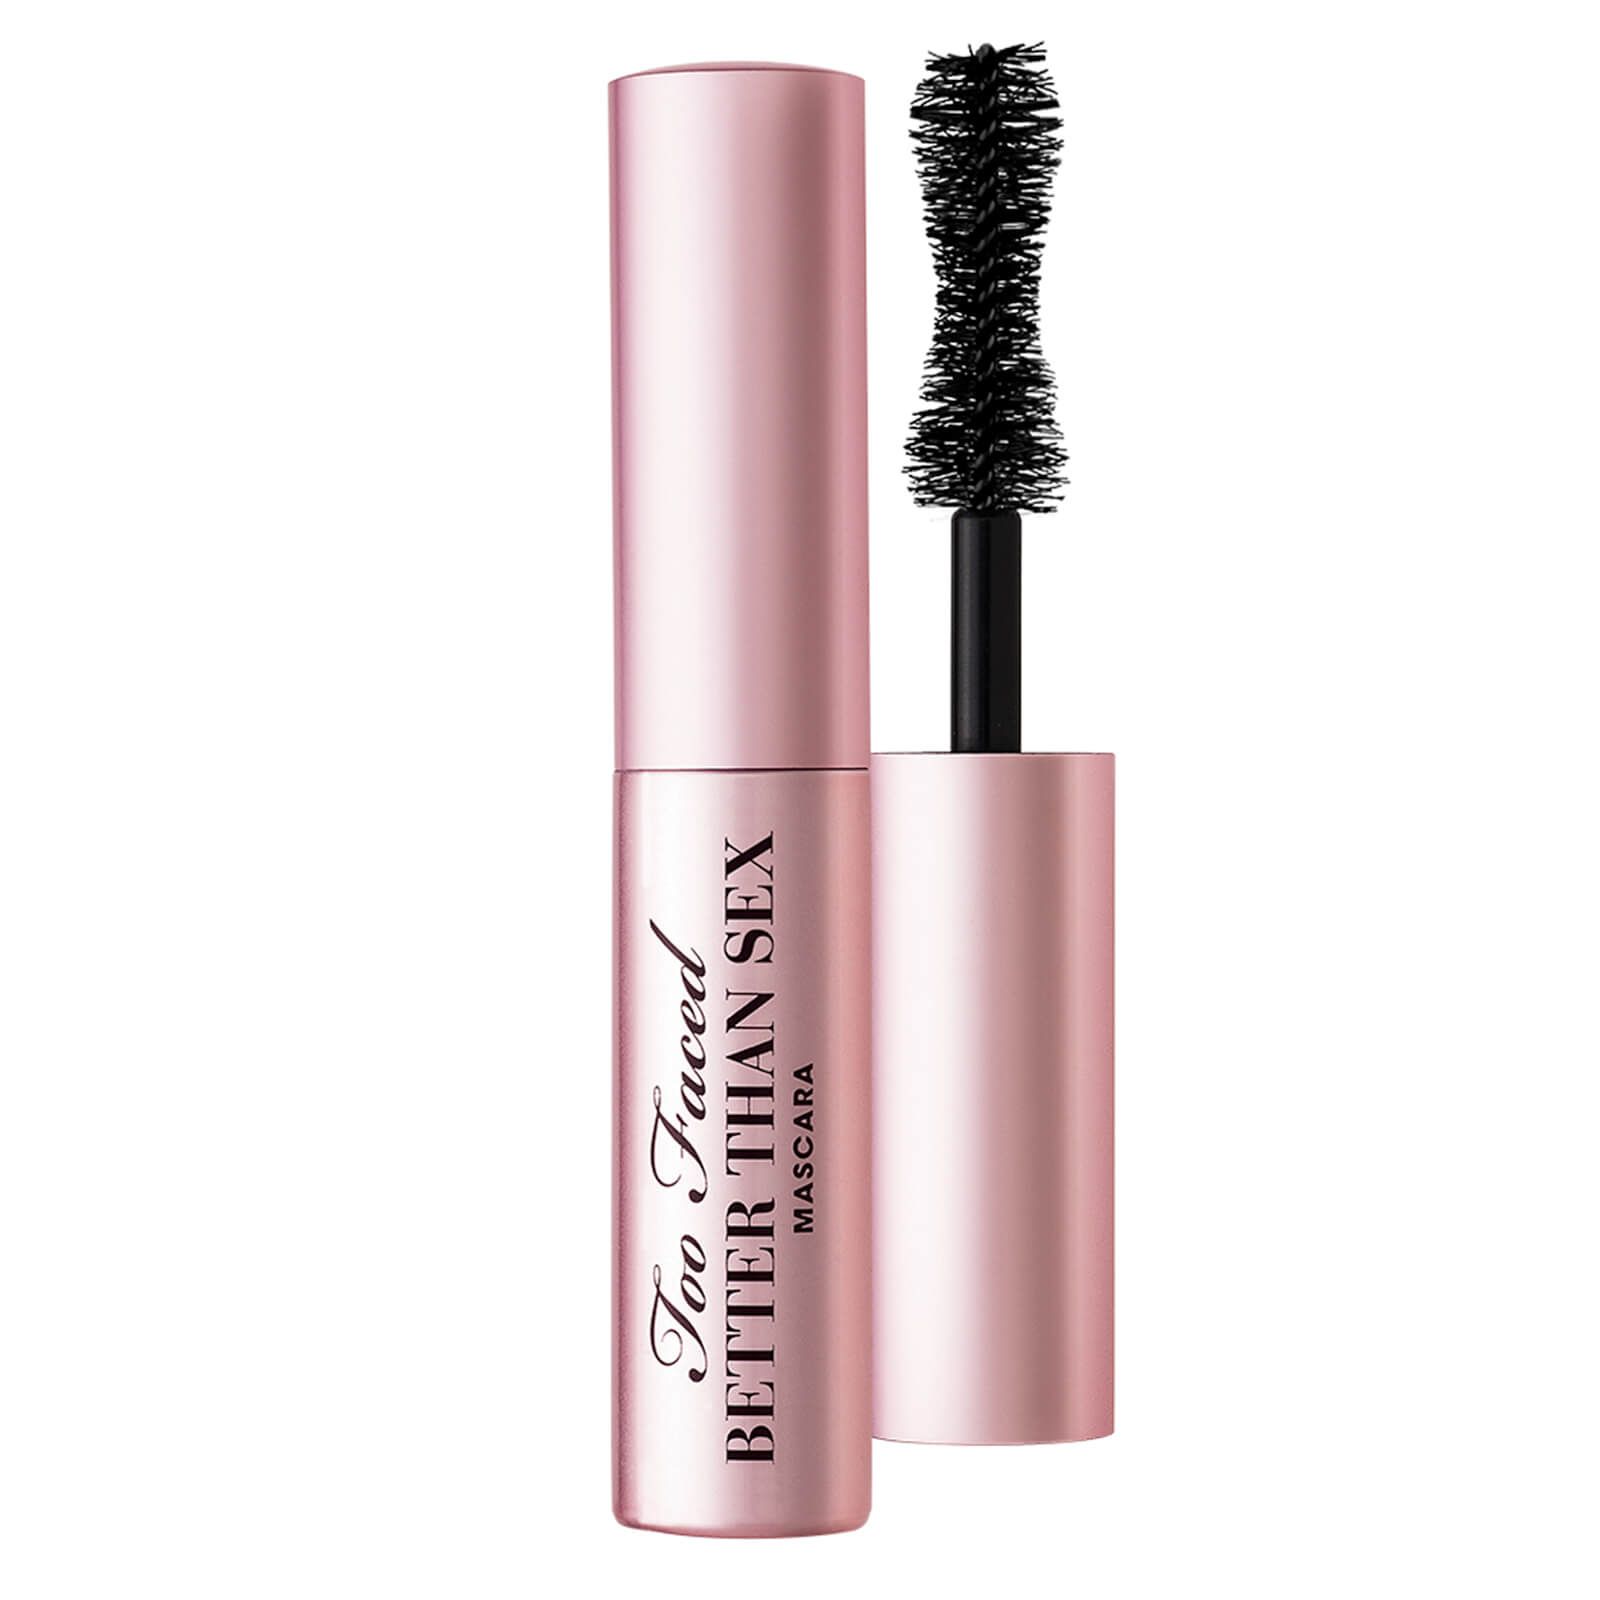 Too Faced Better Than Sex Doll-Size Mascara – Black 4.8g | Look Fantastic (UK)